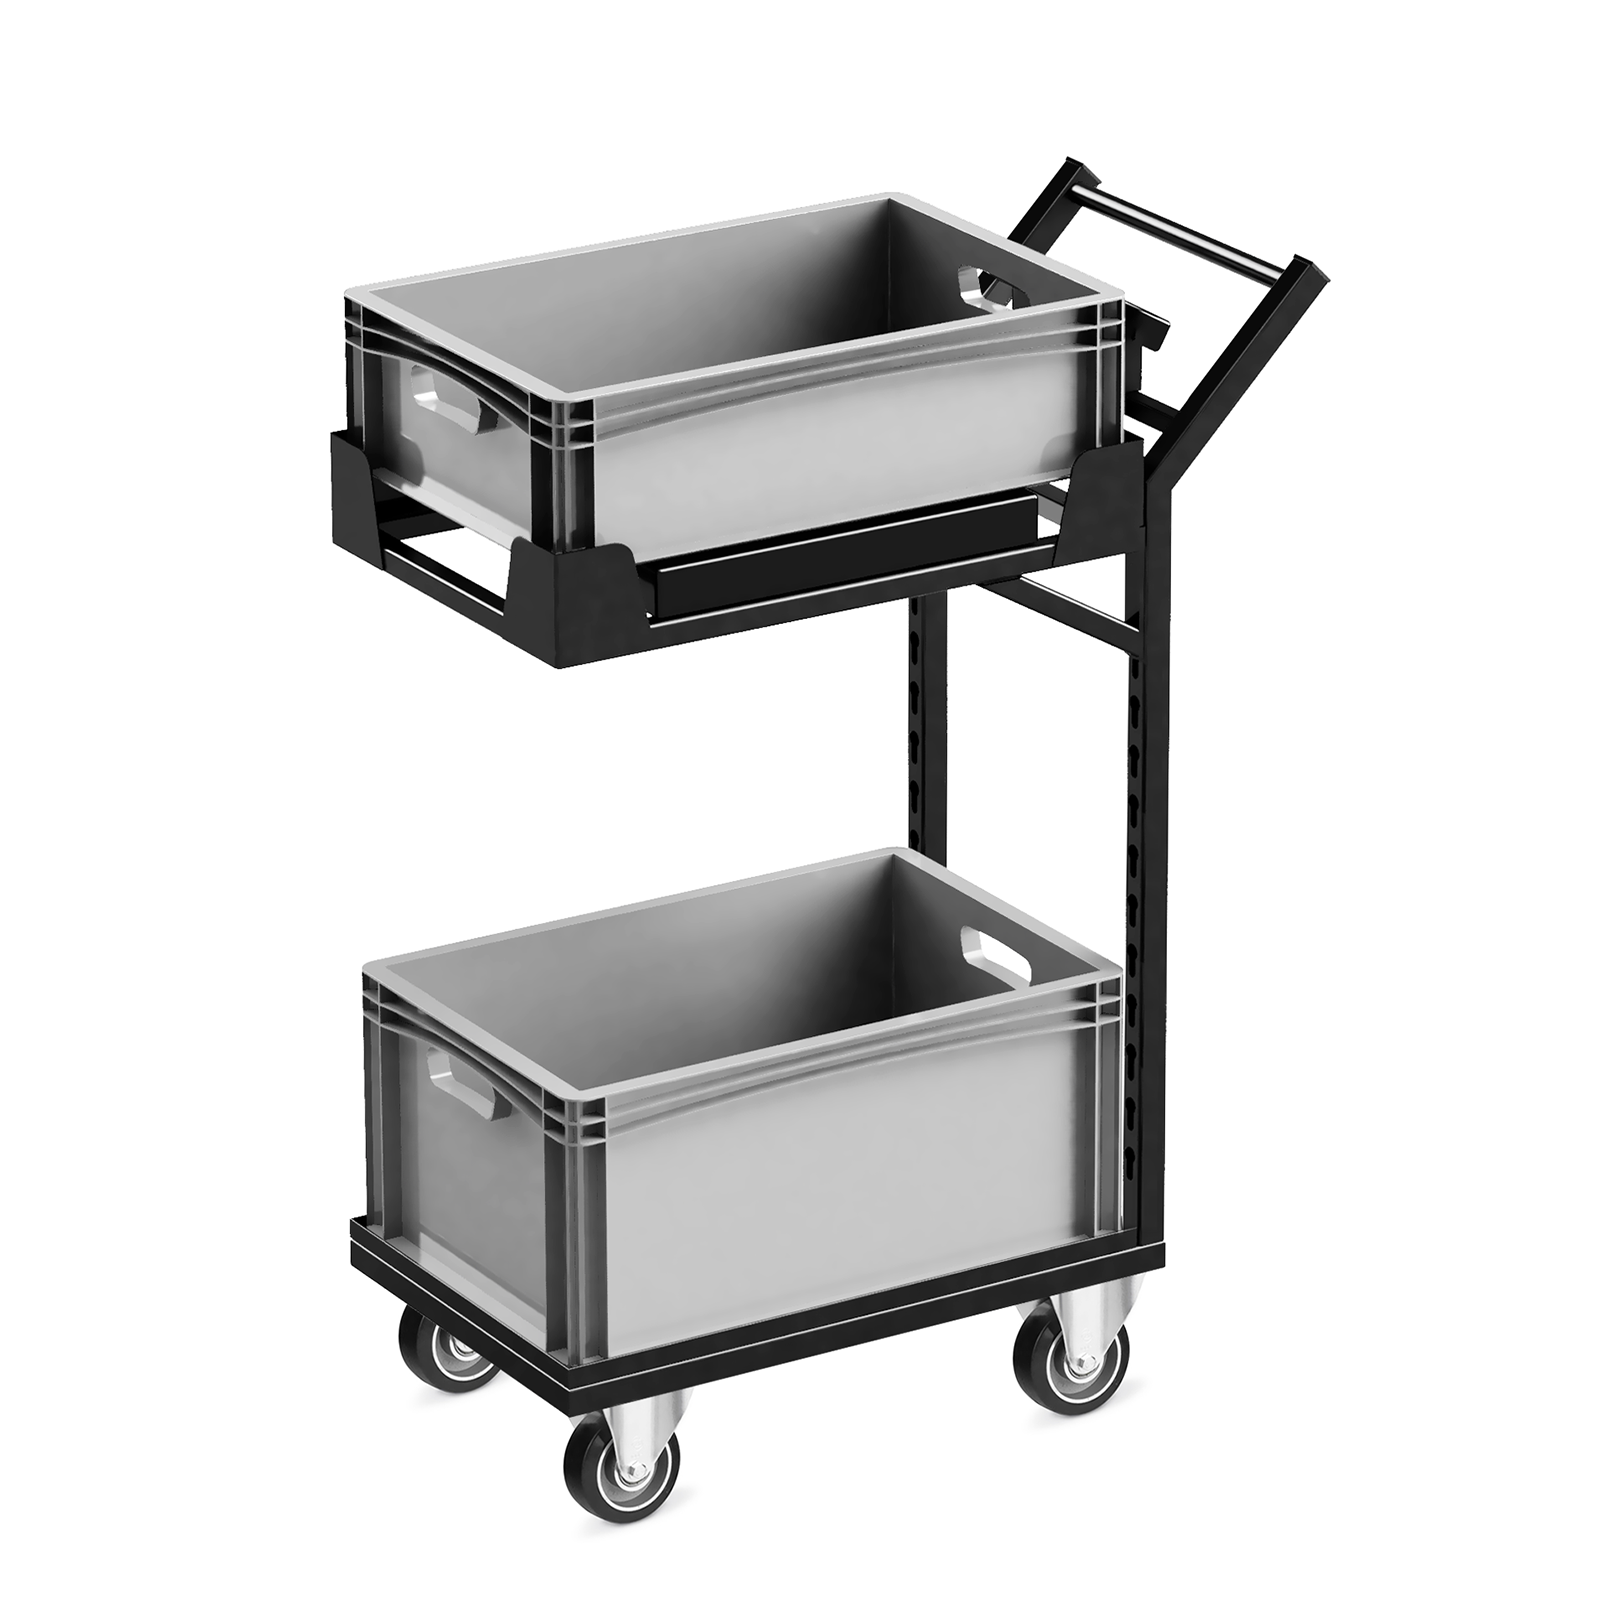 Warehouse trolley for container cuvette transport with built-in scale